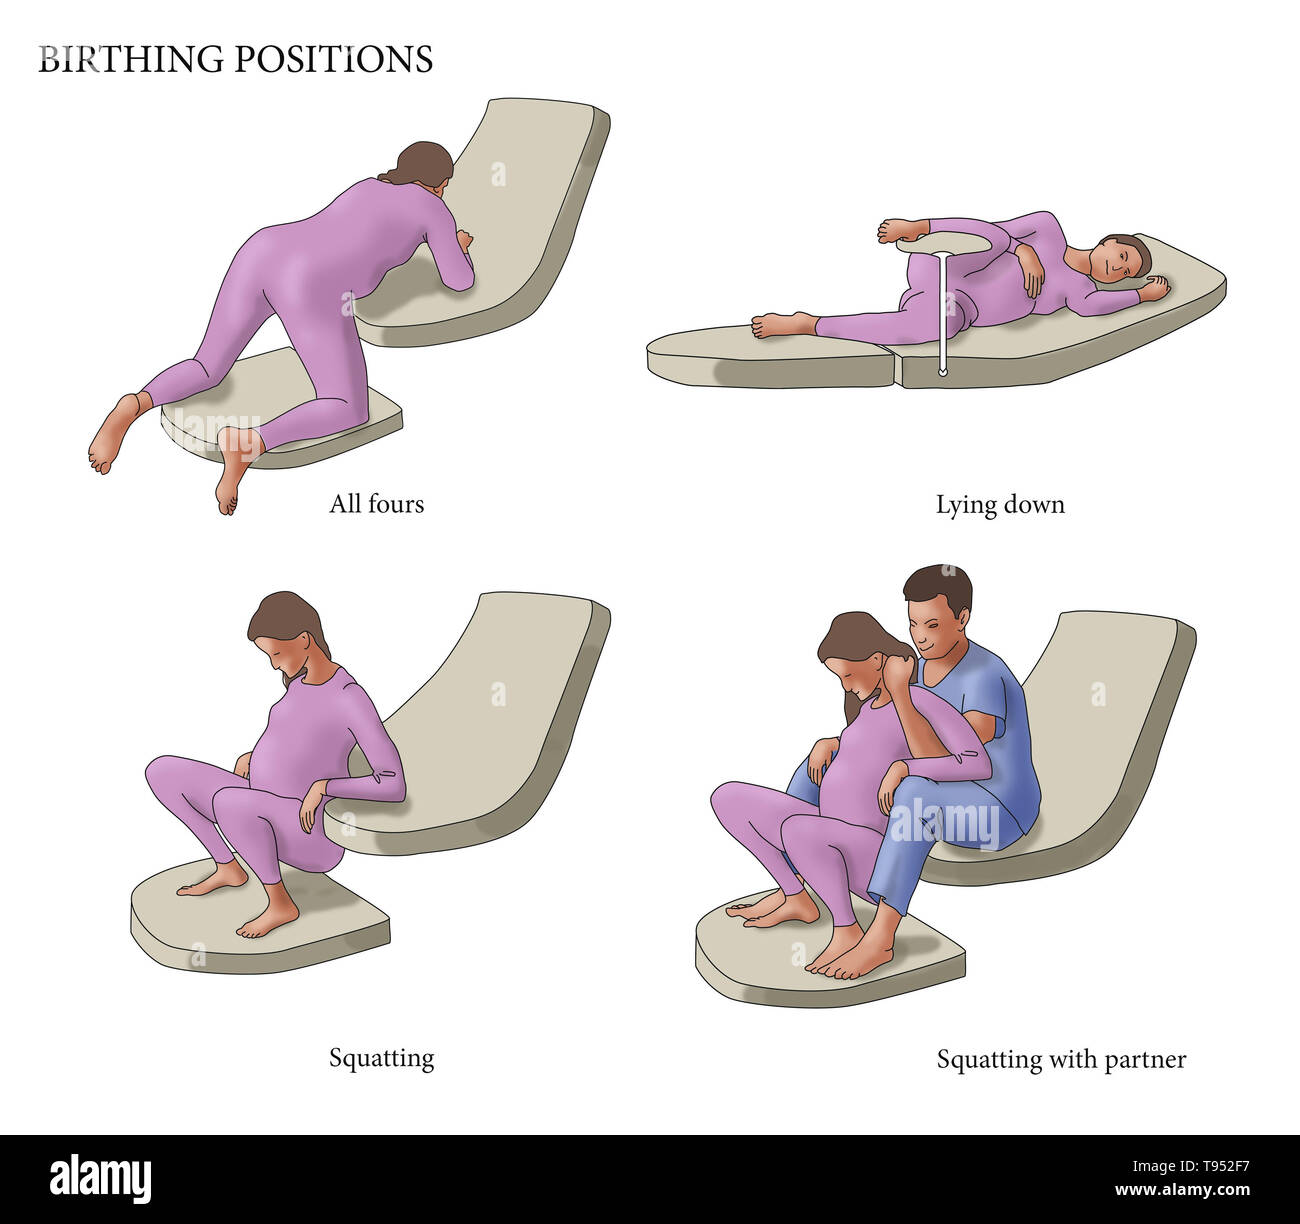 Illustration of four different birthing positions: all fours, lying down, s...